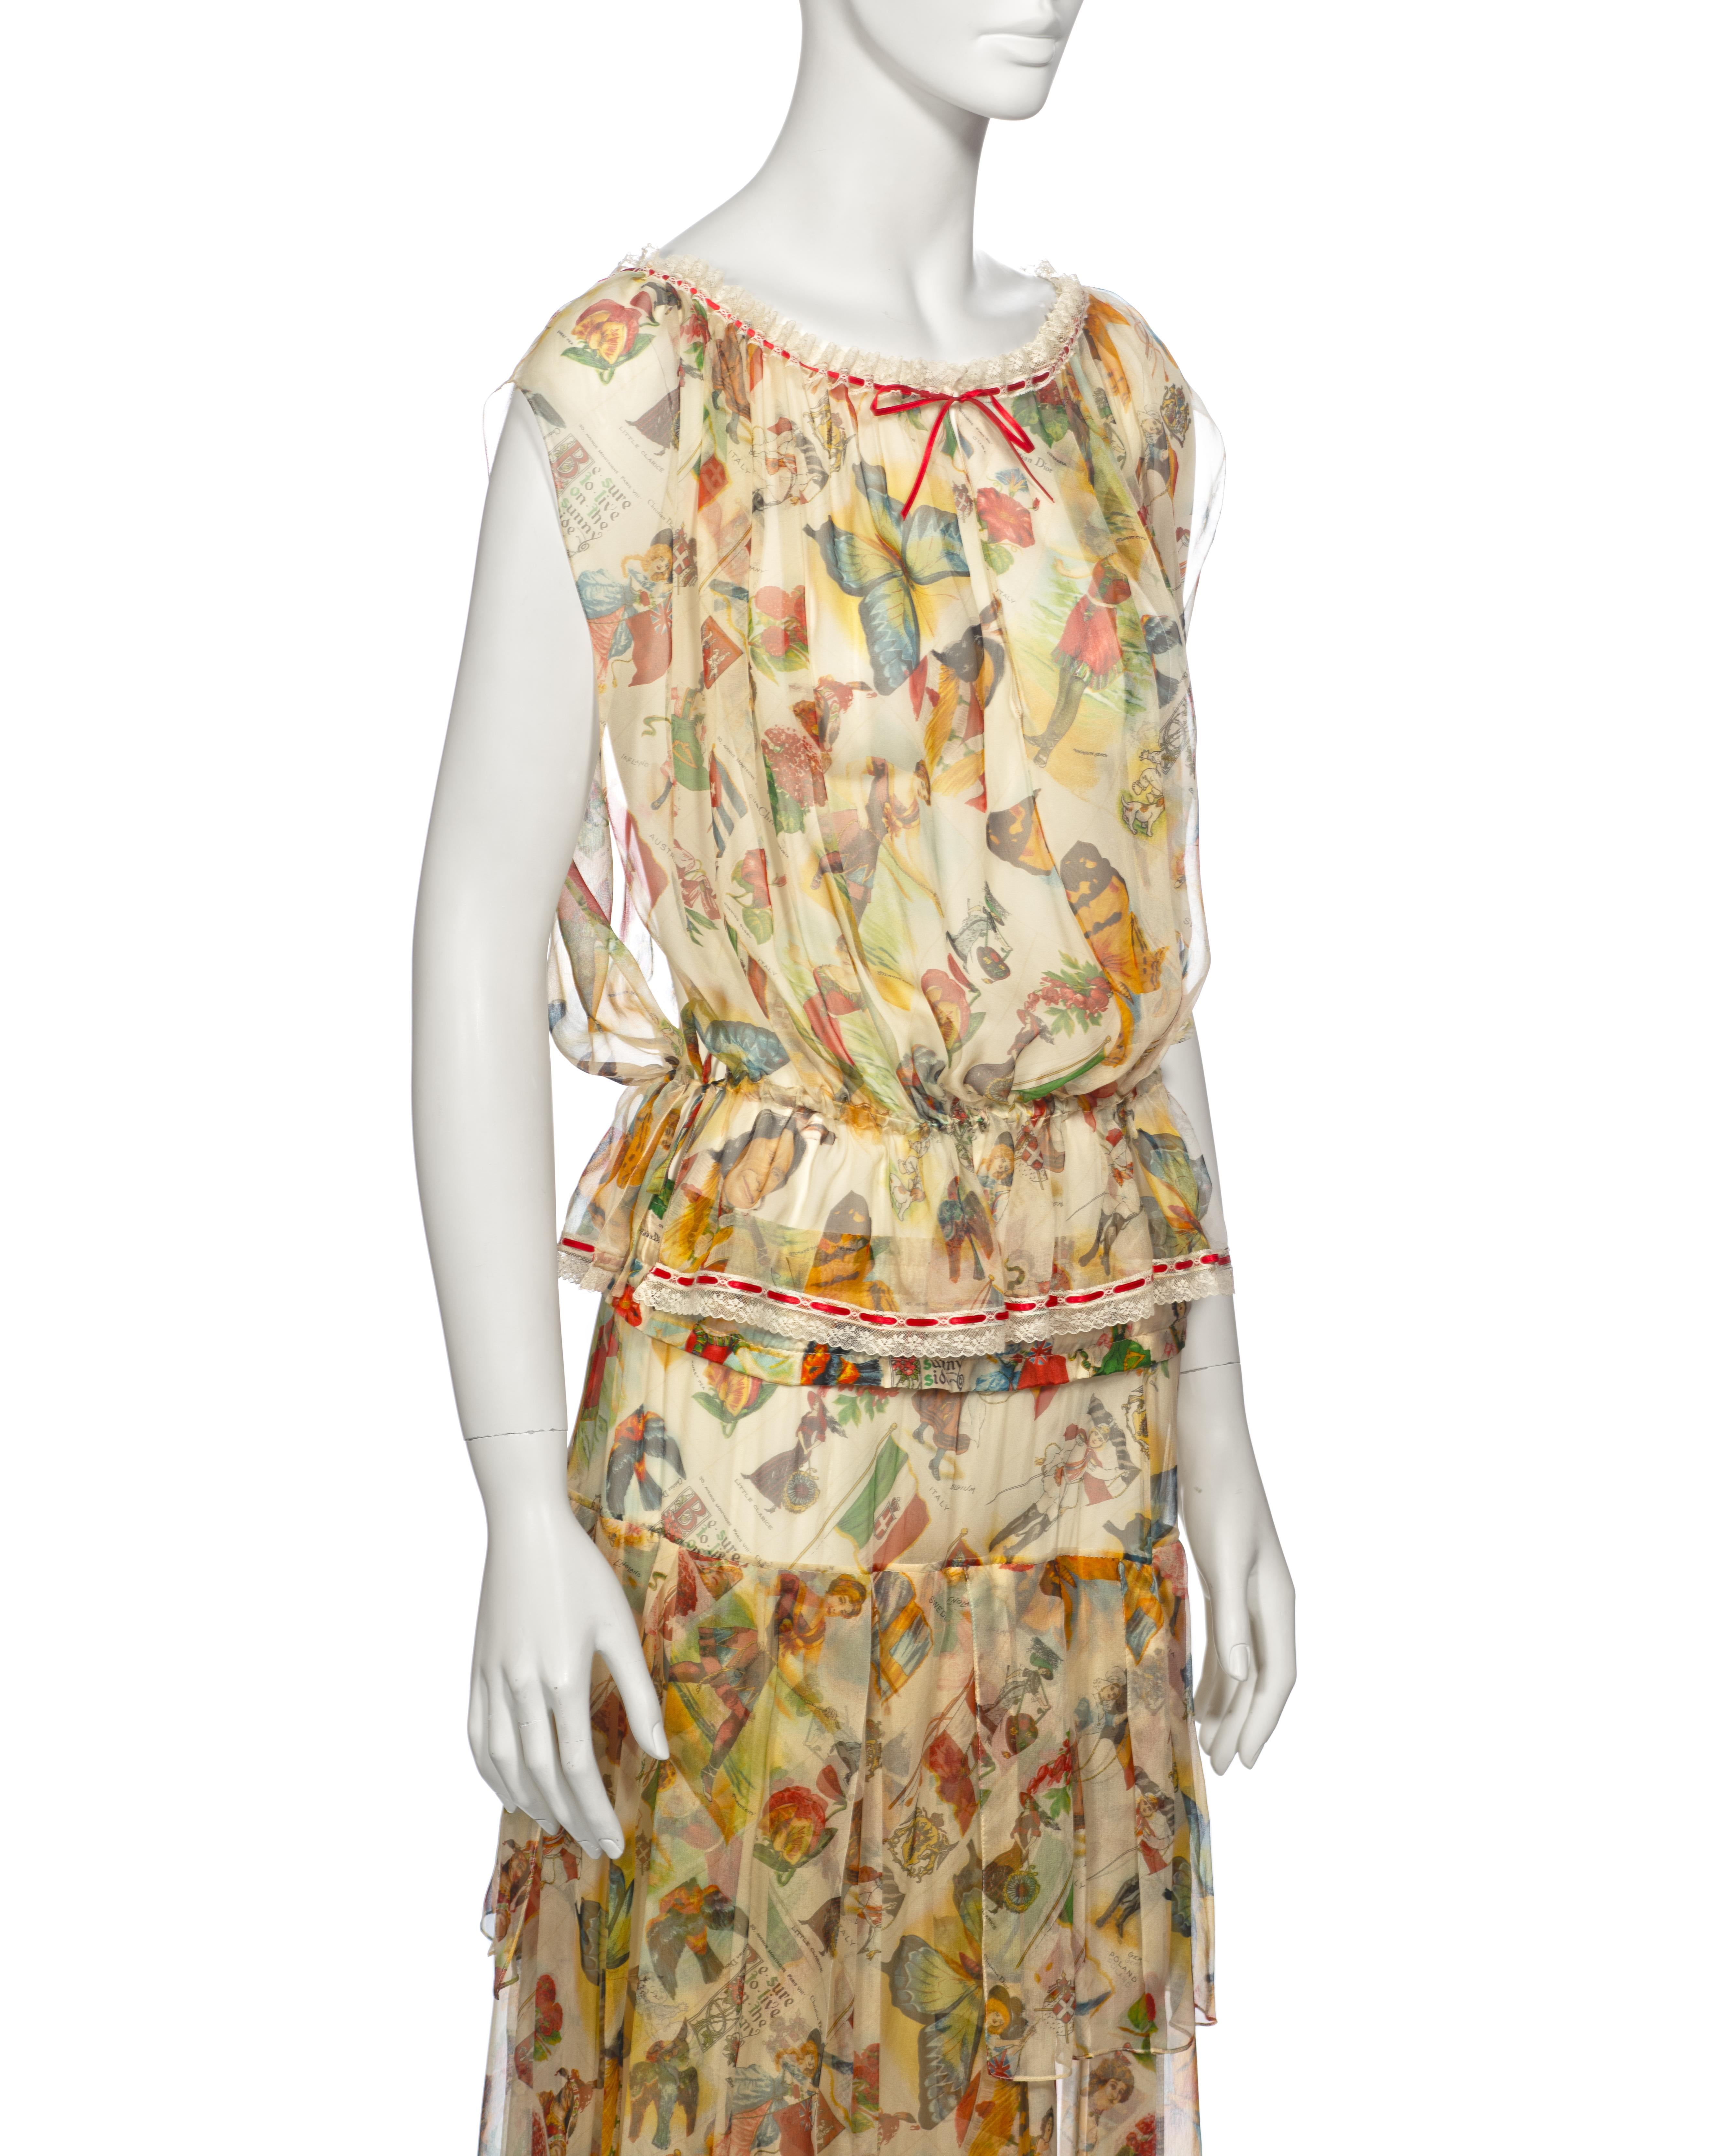 Christian Dior by John Galliano Victoria Print Silk Blouse and Skirt, ss 2002 For Sale 3